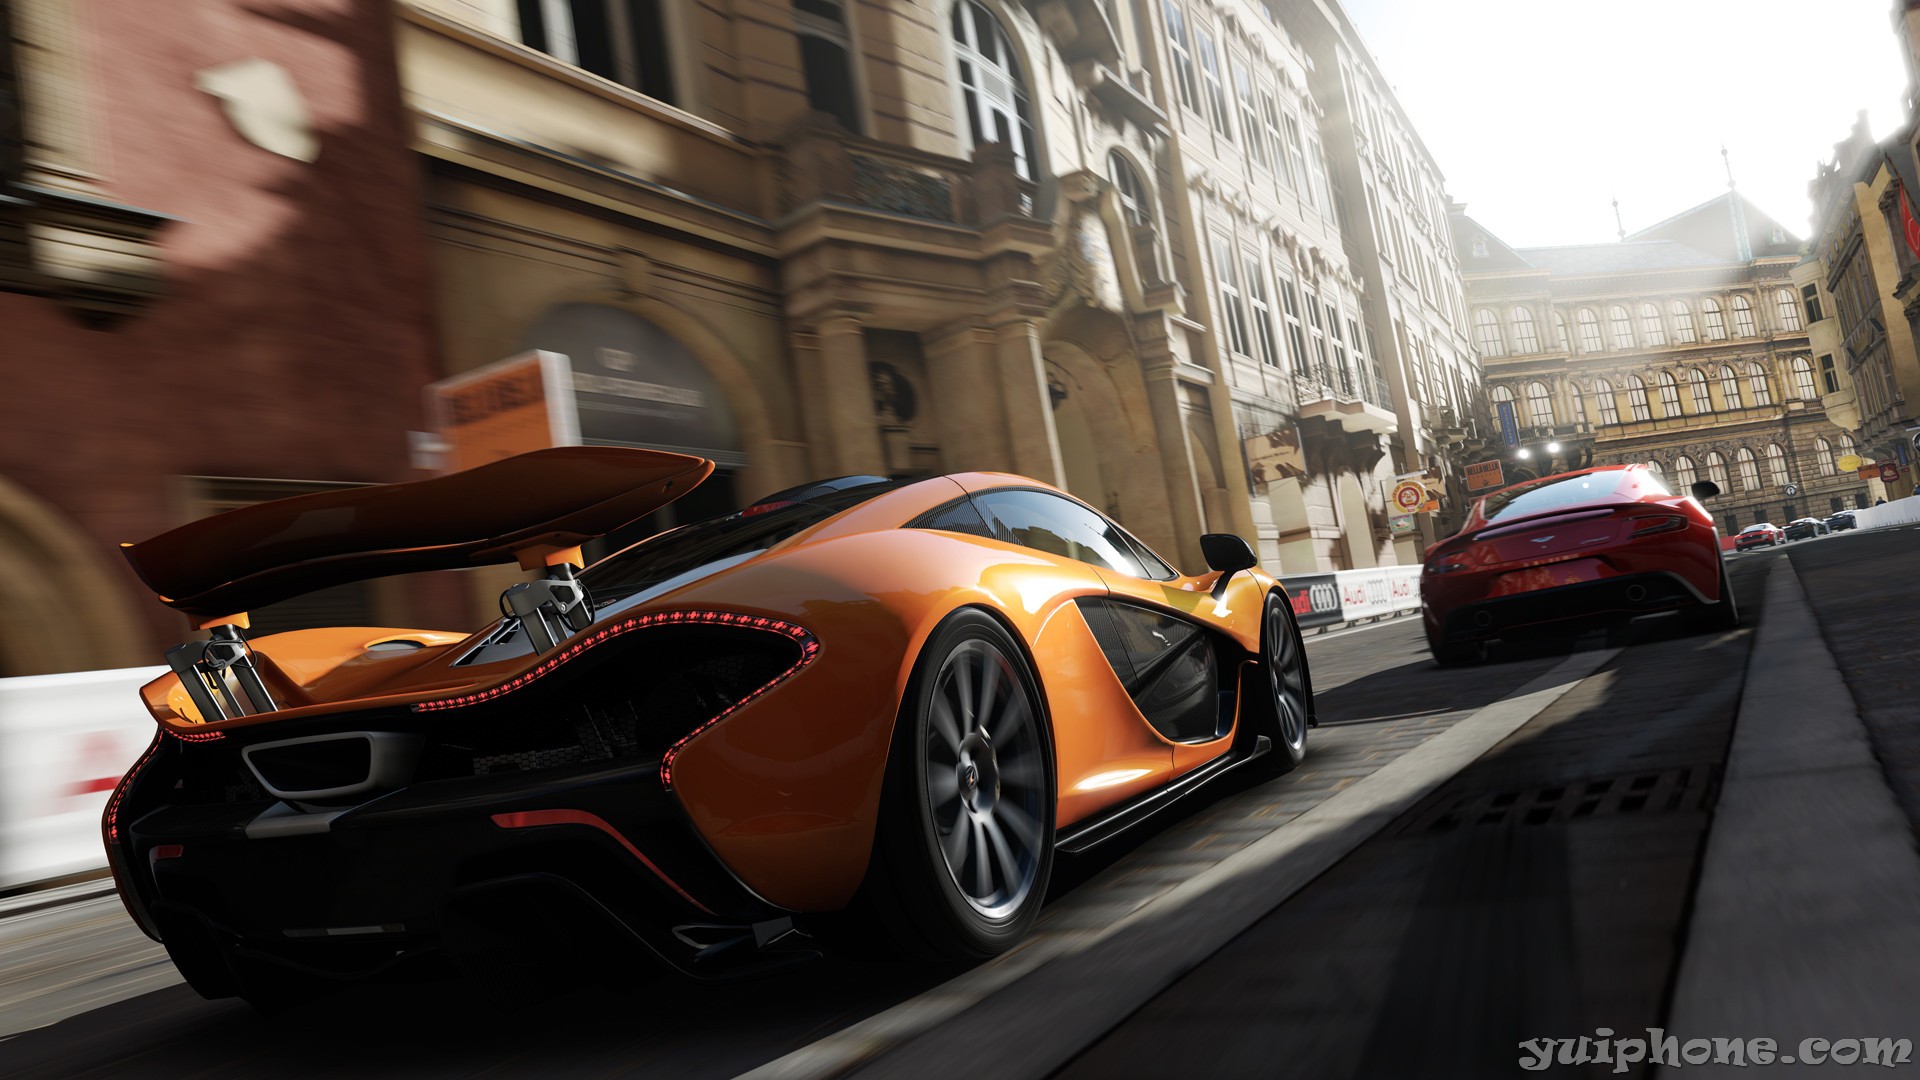 video game, forza motorsport 5, forza